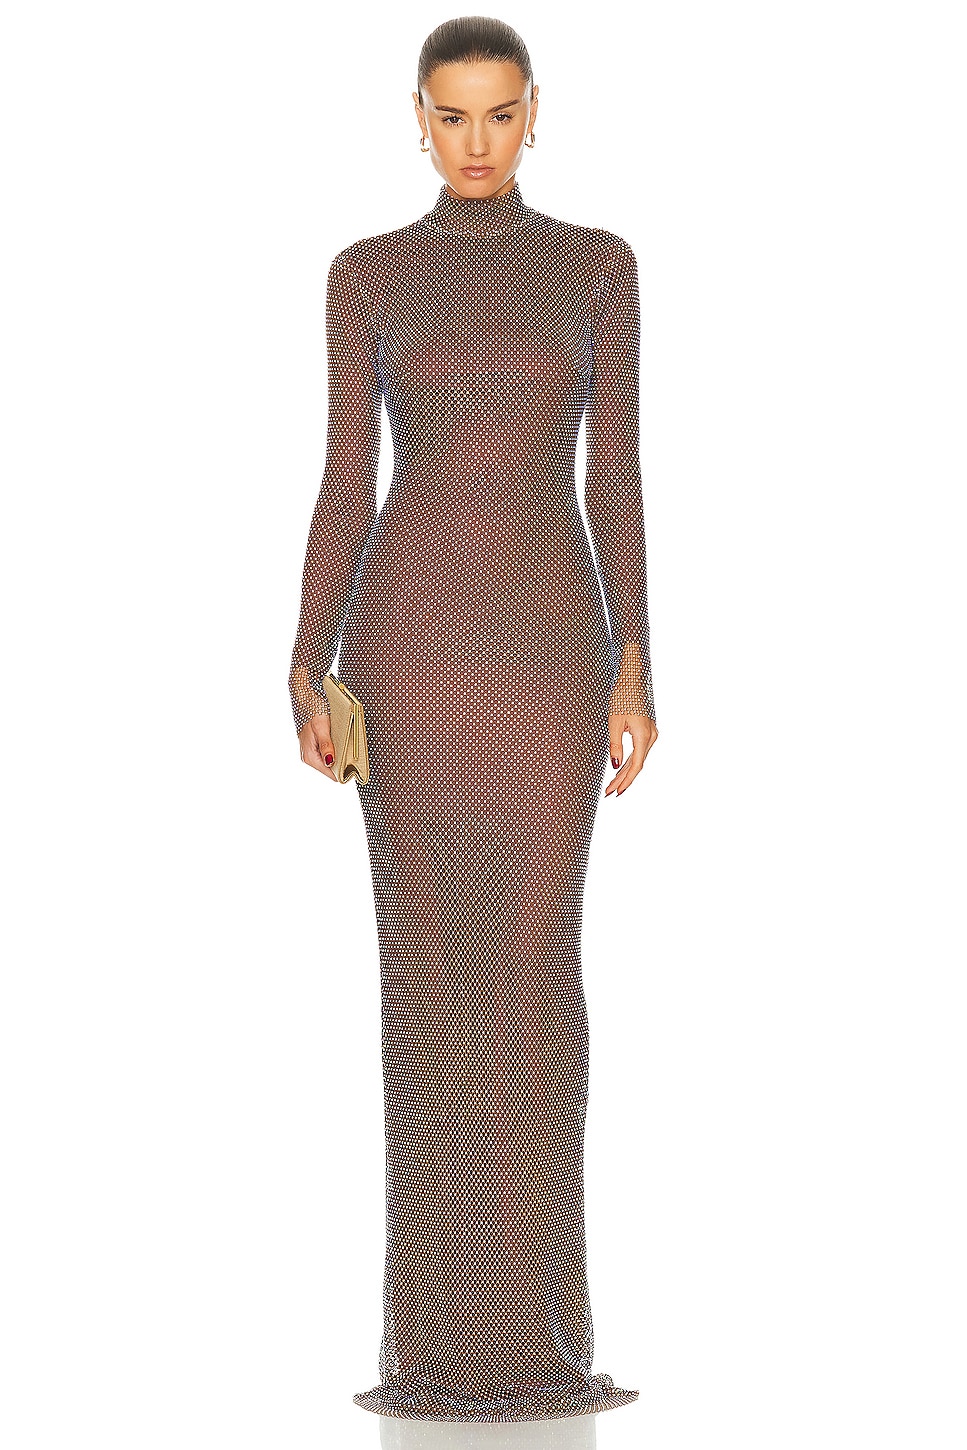 Image 1 of The New Arrivals by Ilkyaz Ozel Donyale Dress in Le S?pia